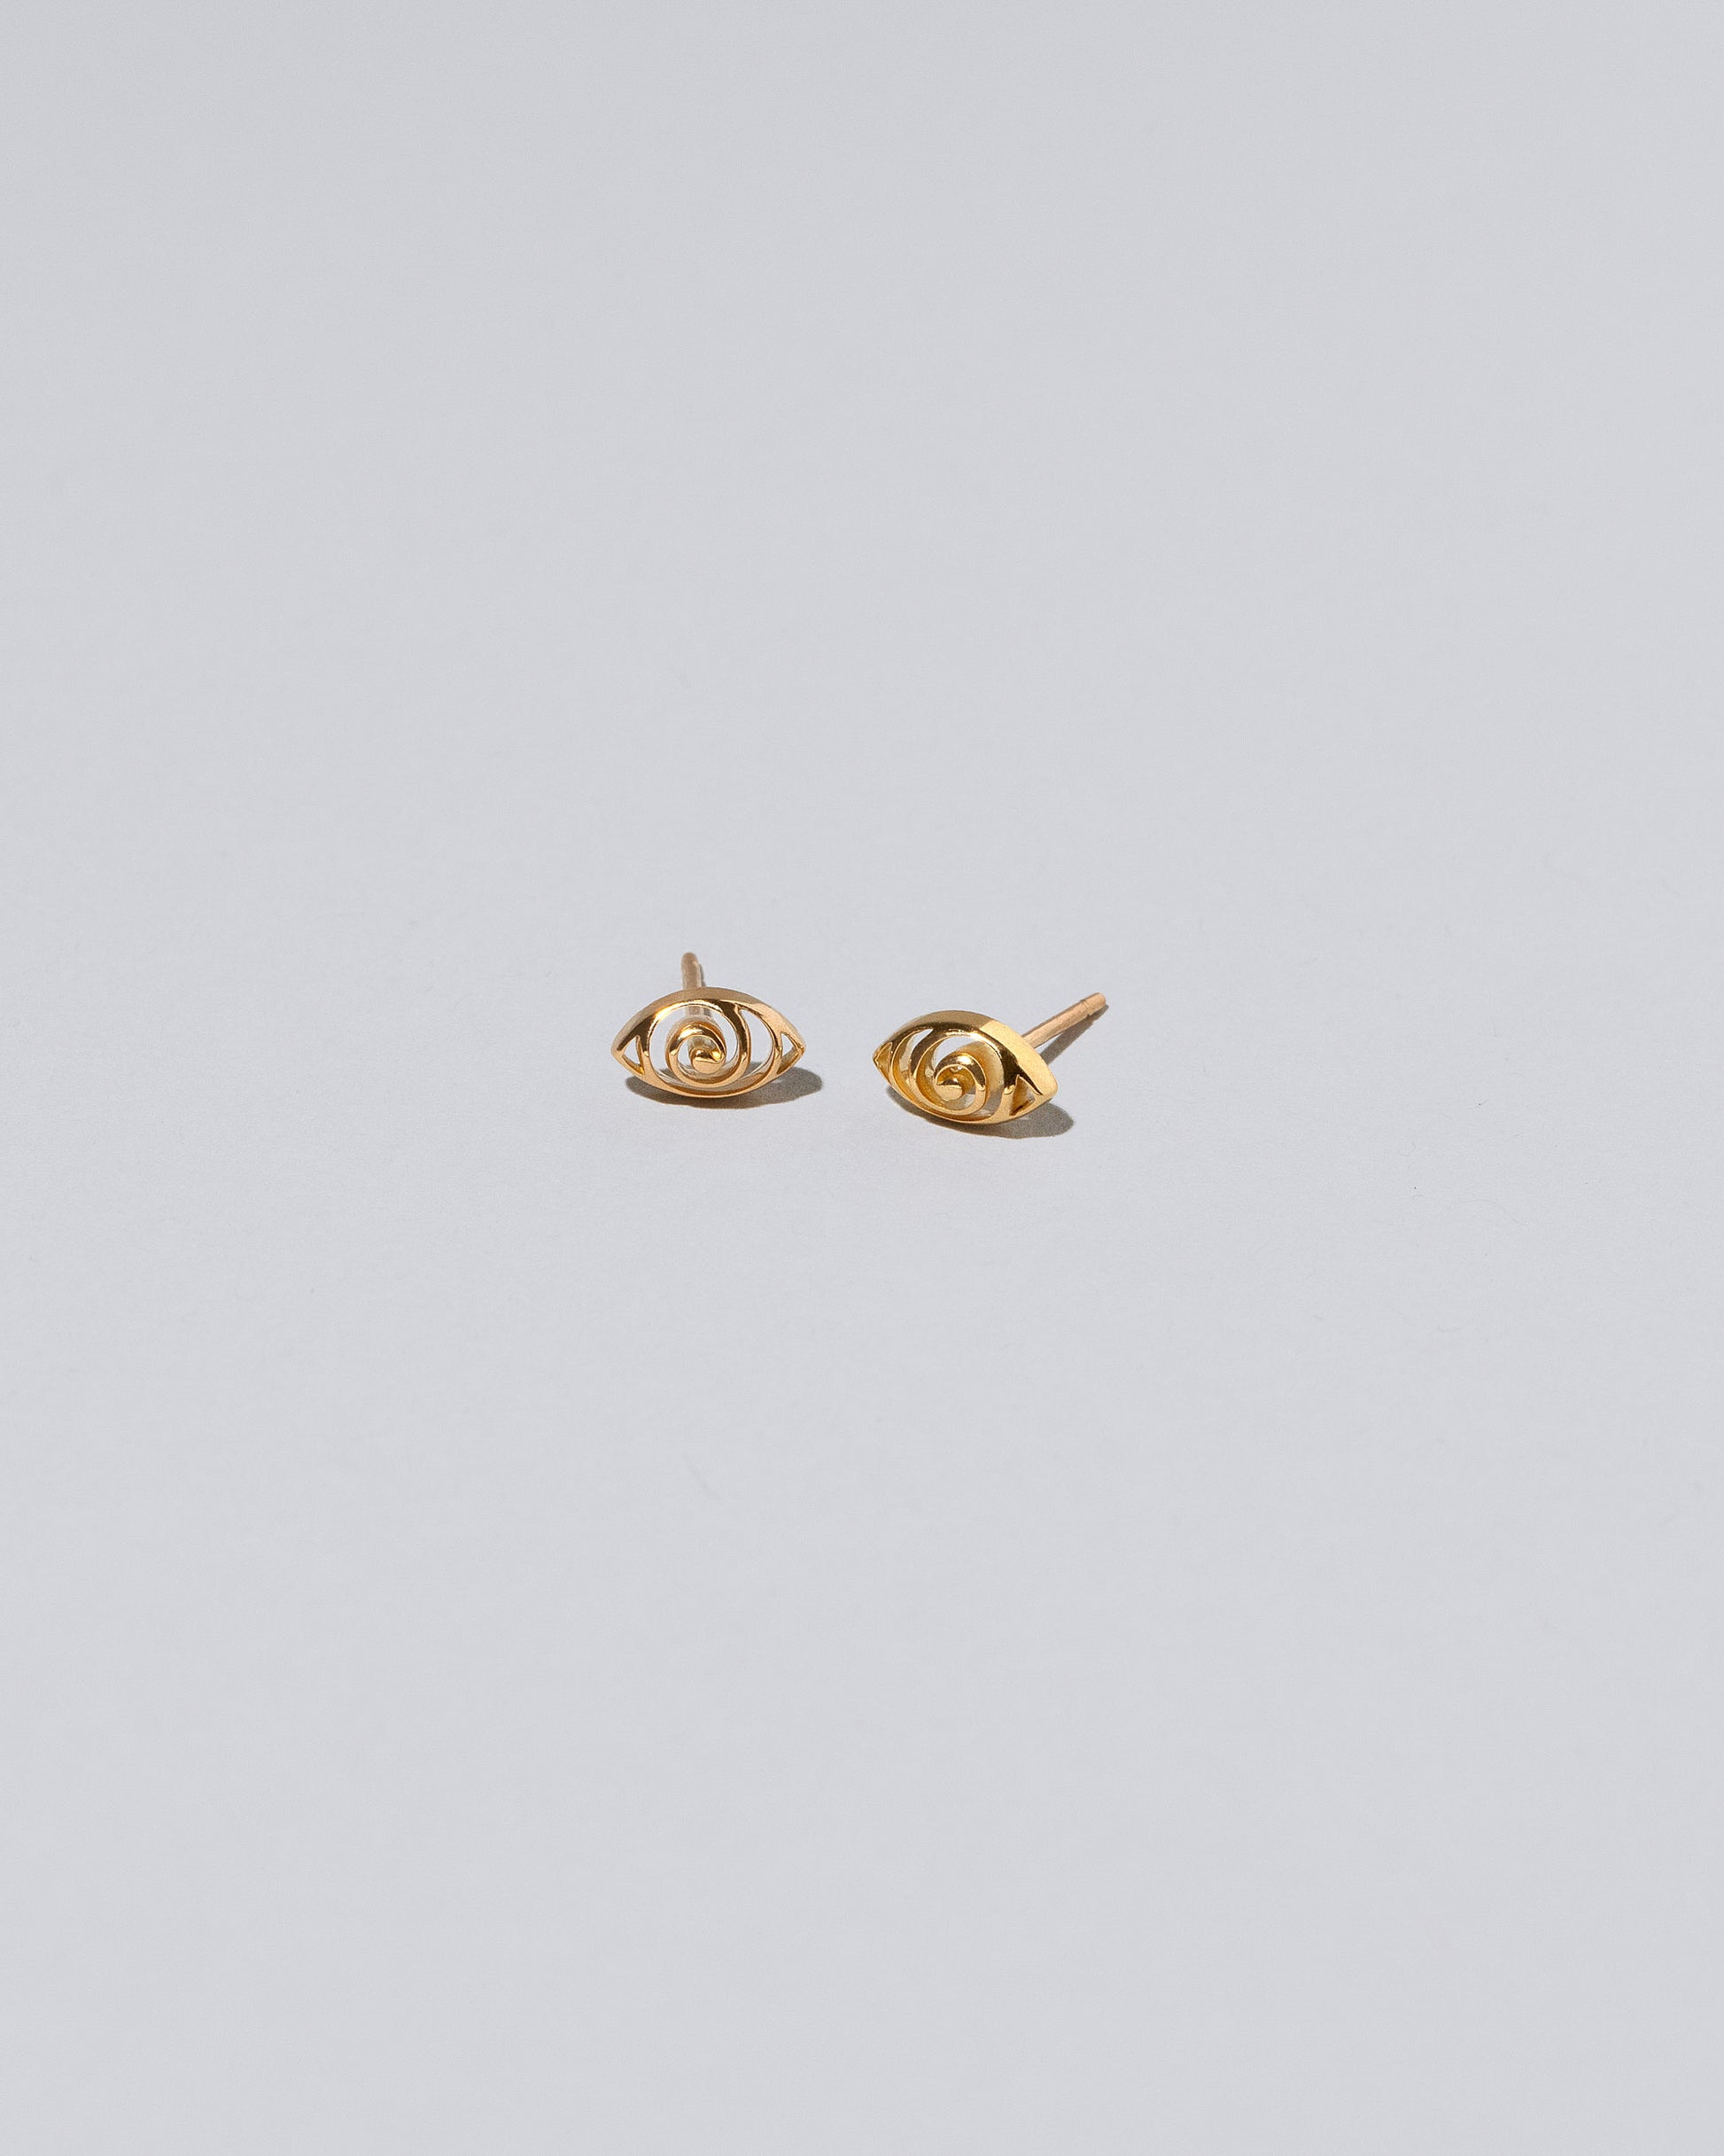 Gold Altered State Stud Earrings on light color background.